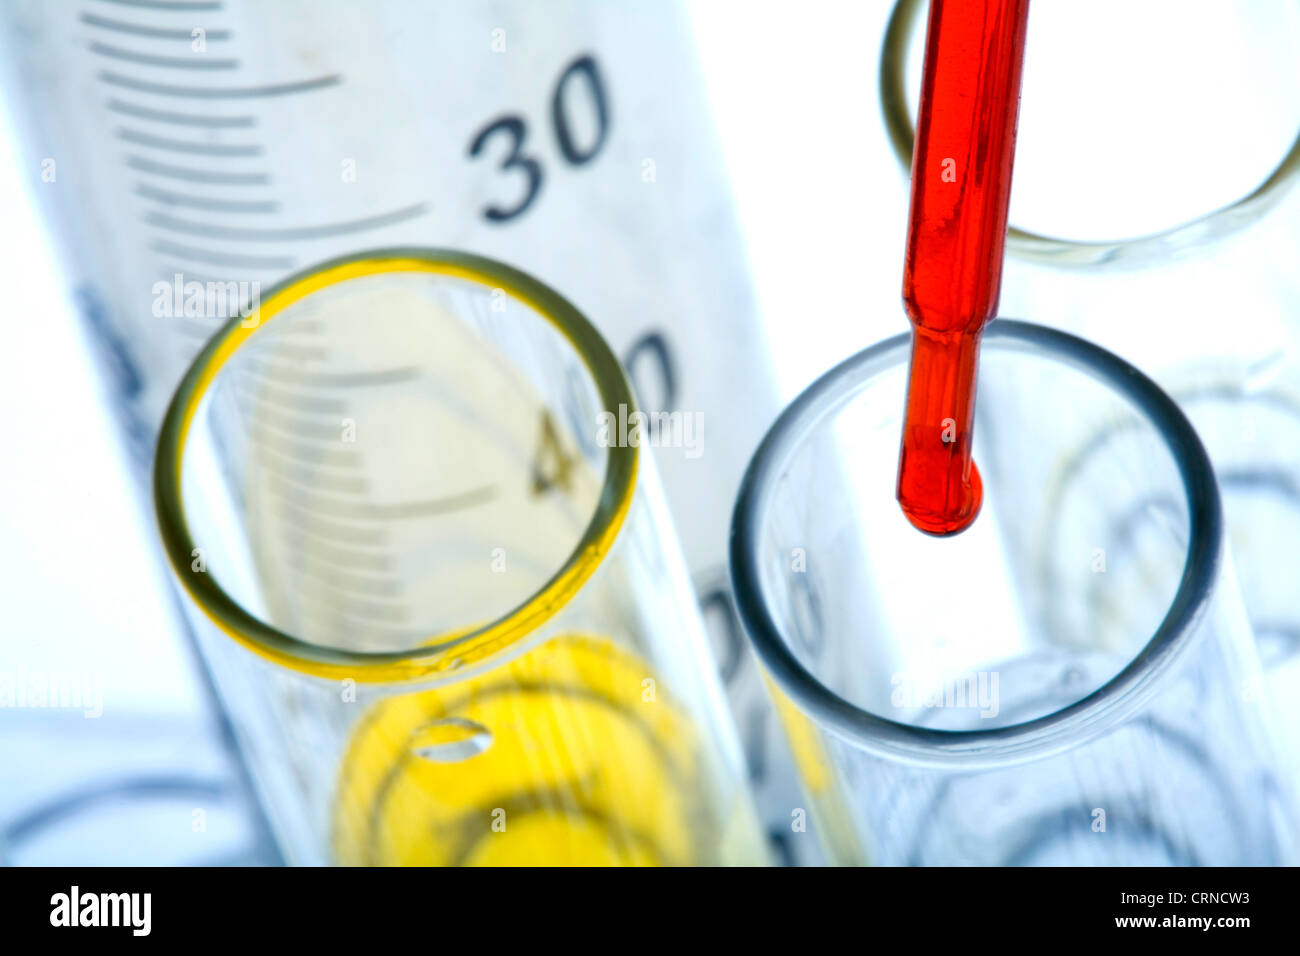 https://c8.alamy.com/comp/CRNCW3/pipetting-red-liquid-into-test-tubes-CRNCW3.jpg